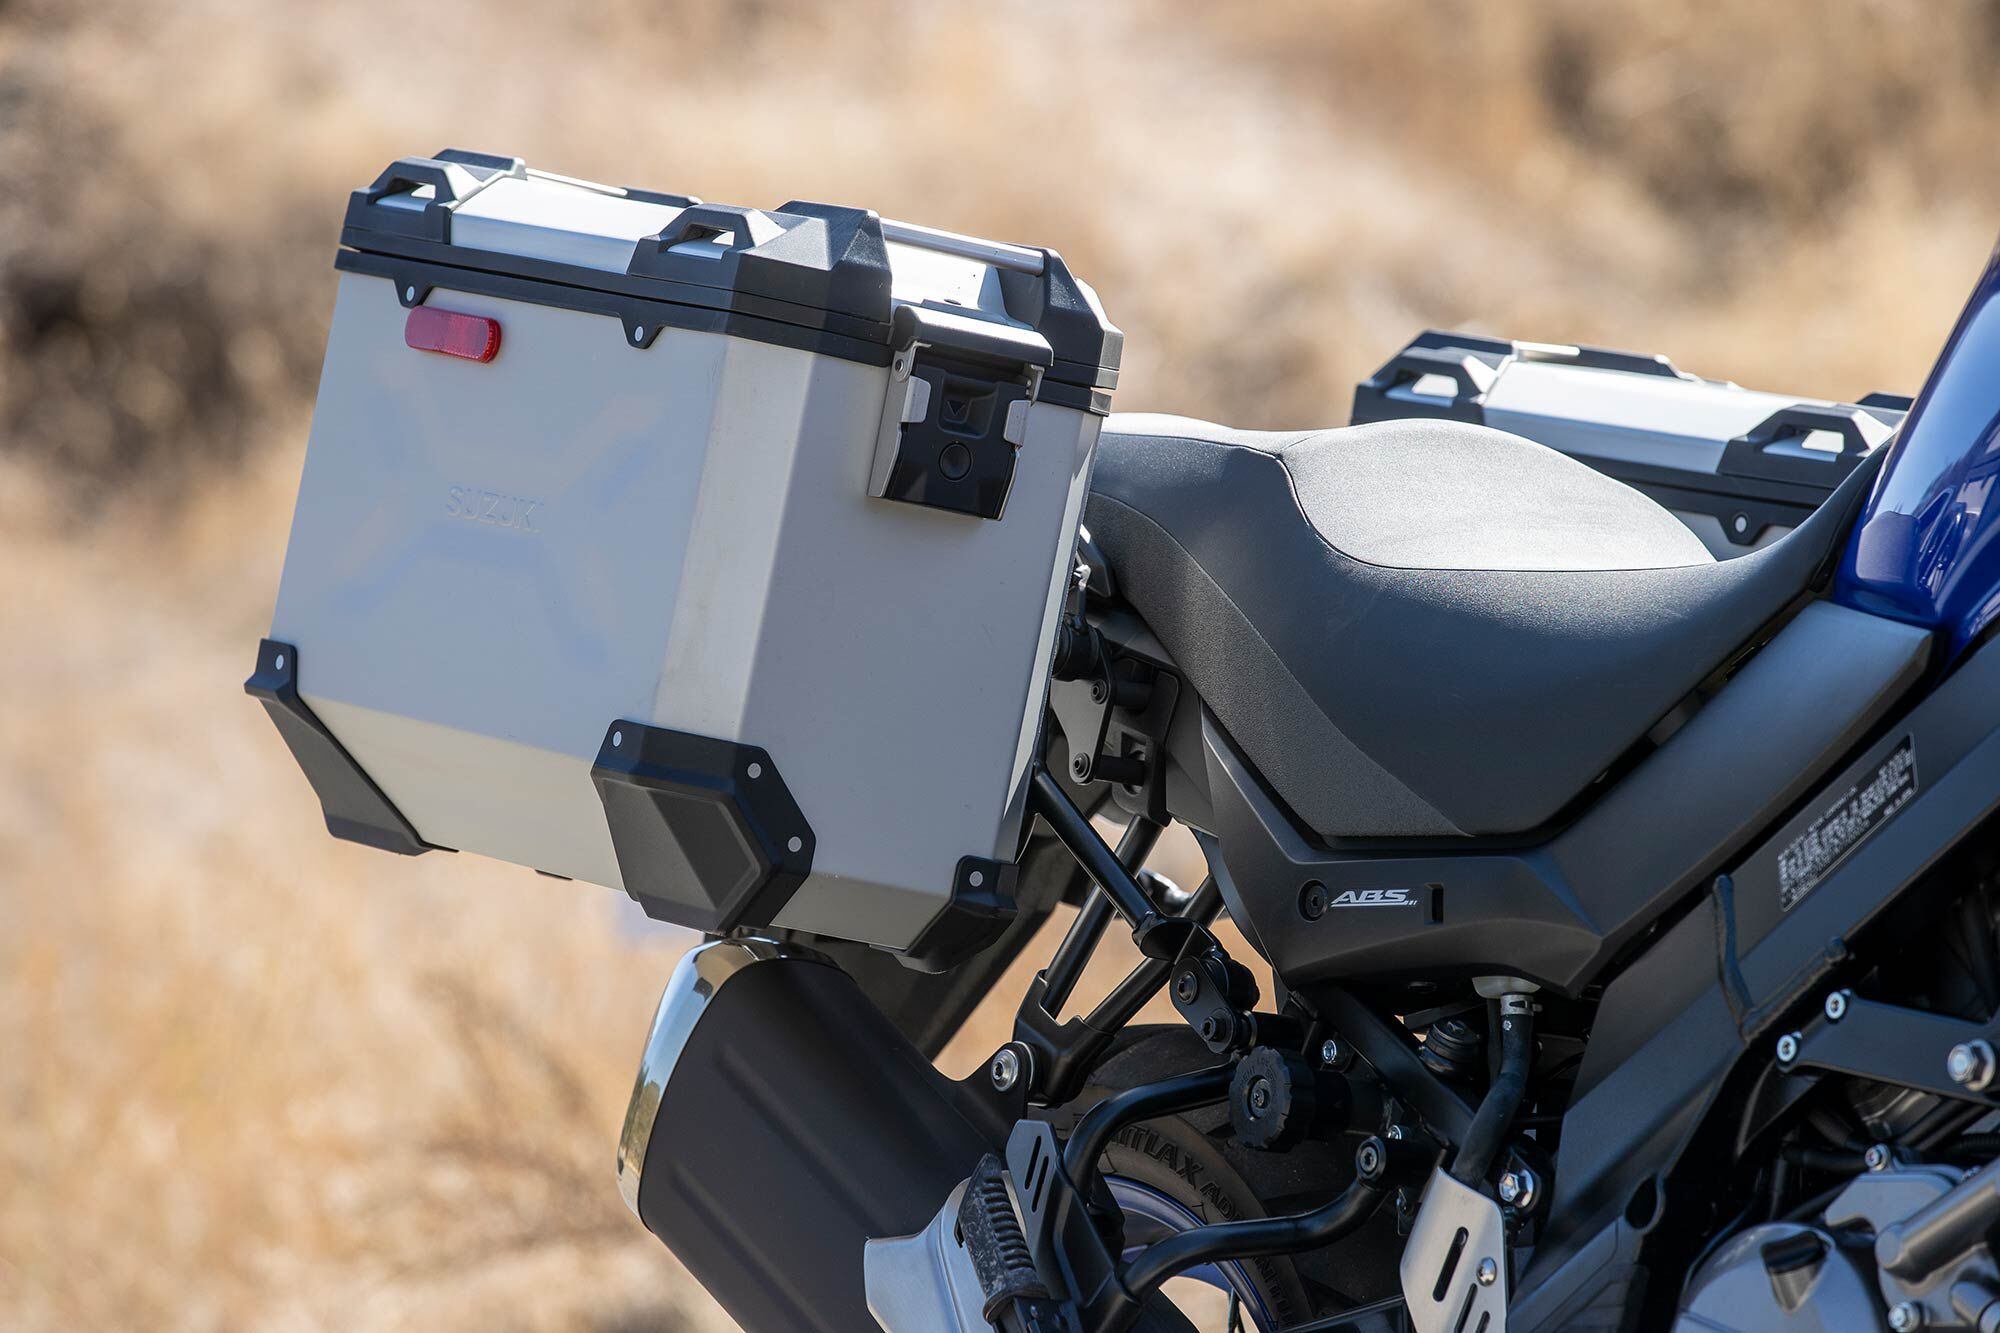 The V-Strom 650XT Adventure’s 37-liter aluminum panniers won’t fit a helmet, but do provide a nice flat surface for strapping down additional items.